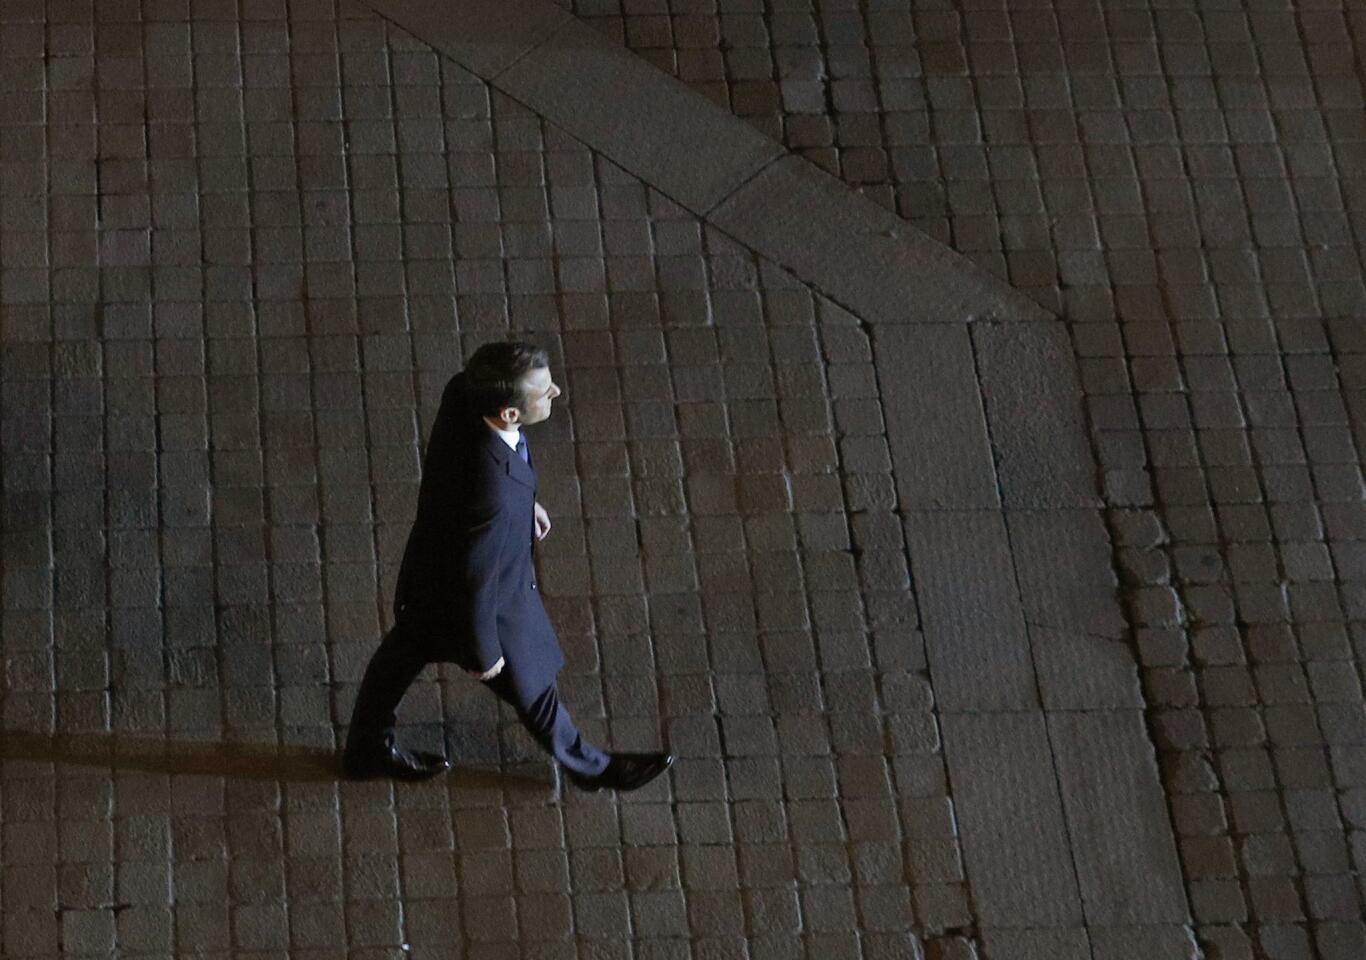 Incoming French President Emmanuel Macron walks towards the stage to address his supporters at the Louvre Palace in Paris, Sunday May 7, 2017. Polling agencies have projected that centrist Macron will be France's next president, putting a 39-year-old political novice at the helm of one of the world's biggest economies and slowing a global populist wave. (AP Photo/Christophe Ena, Pool)